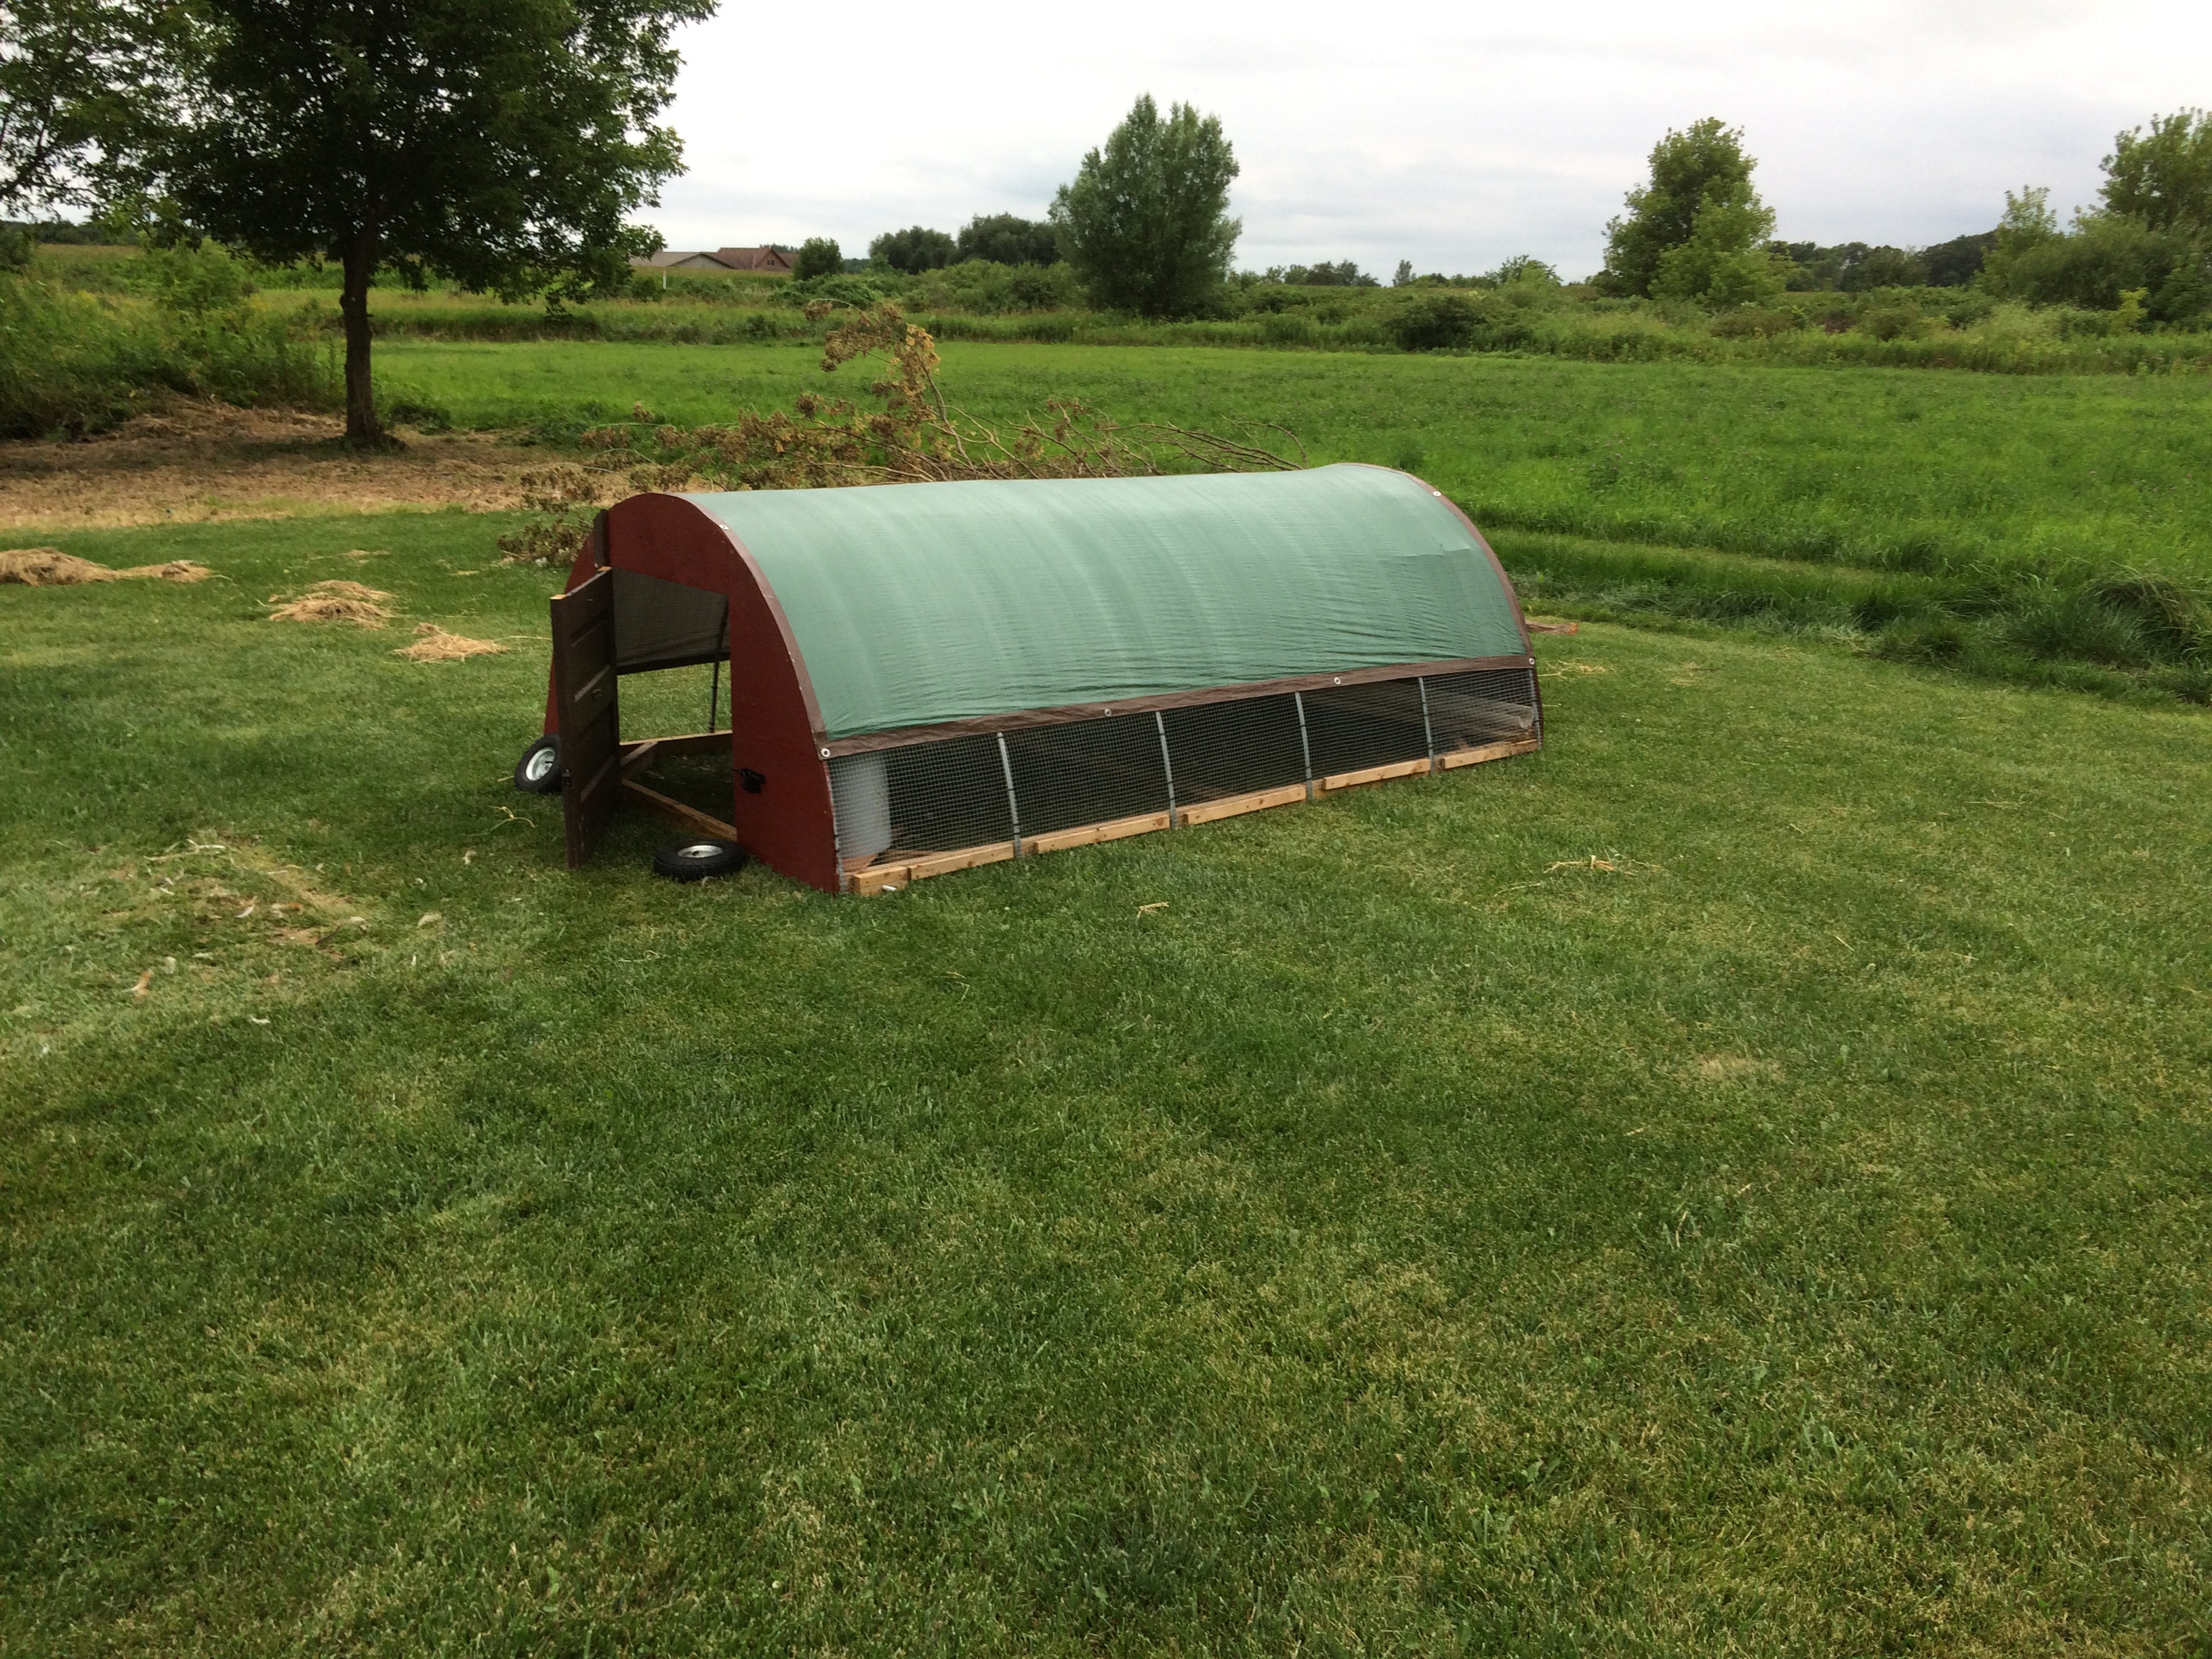 My home built hoop house that houses about 20-25 Broilers.  6' x 10'

Base is made of pressure treated 2x4, the ends are 1/2" plywood painted with oil barn paint.  The hoops are 1/2" EMT conduit and the covering is 1/2"  hardware cloth and an 8x10 light duty tarp